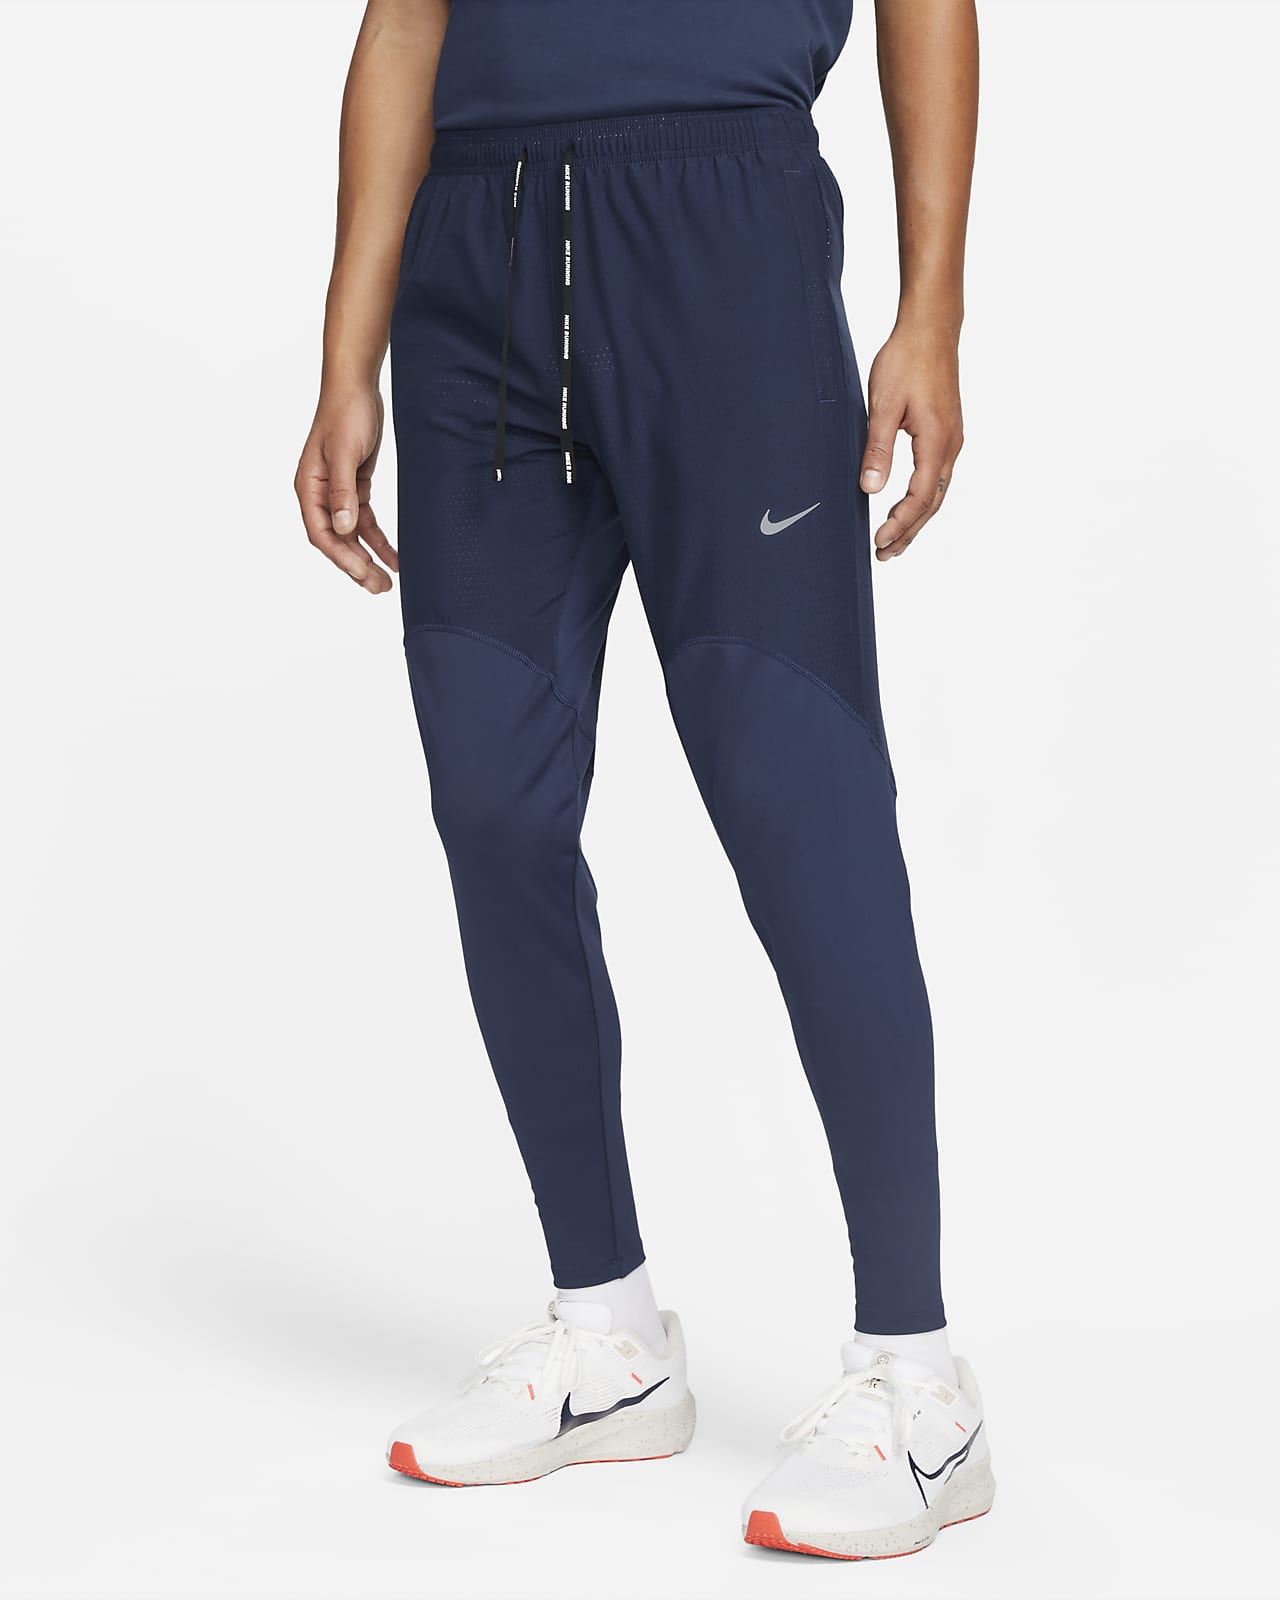 Nike | Academy Track Pants Adults | Performance Tracksuit Bottoms |  SportsDirect.com